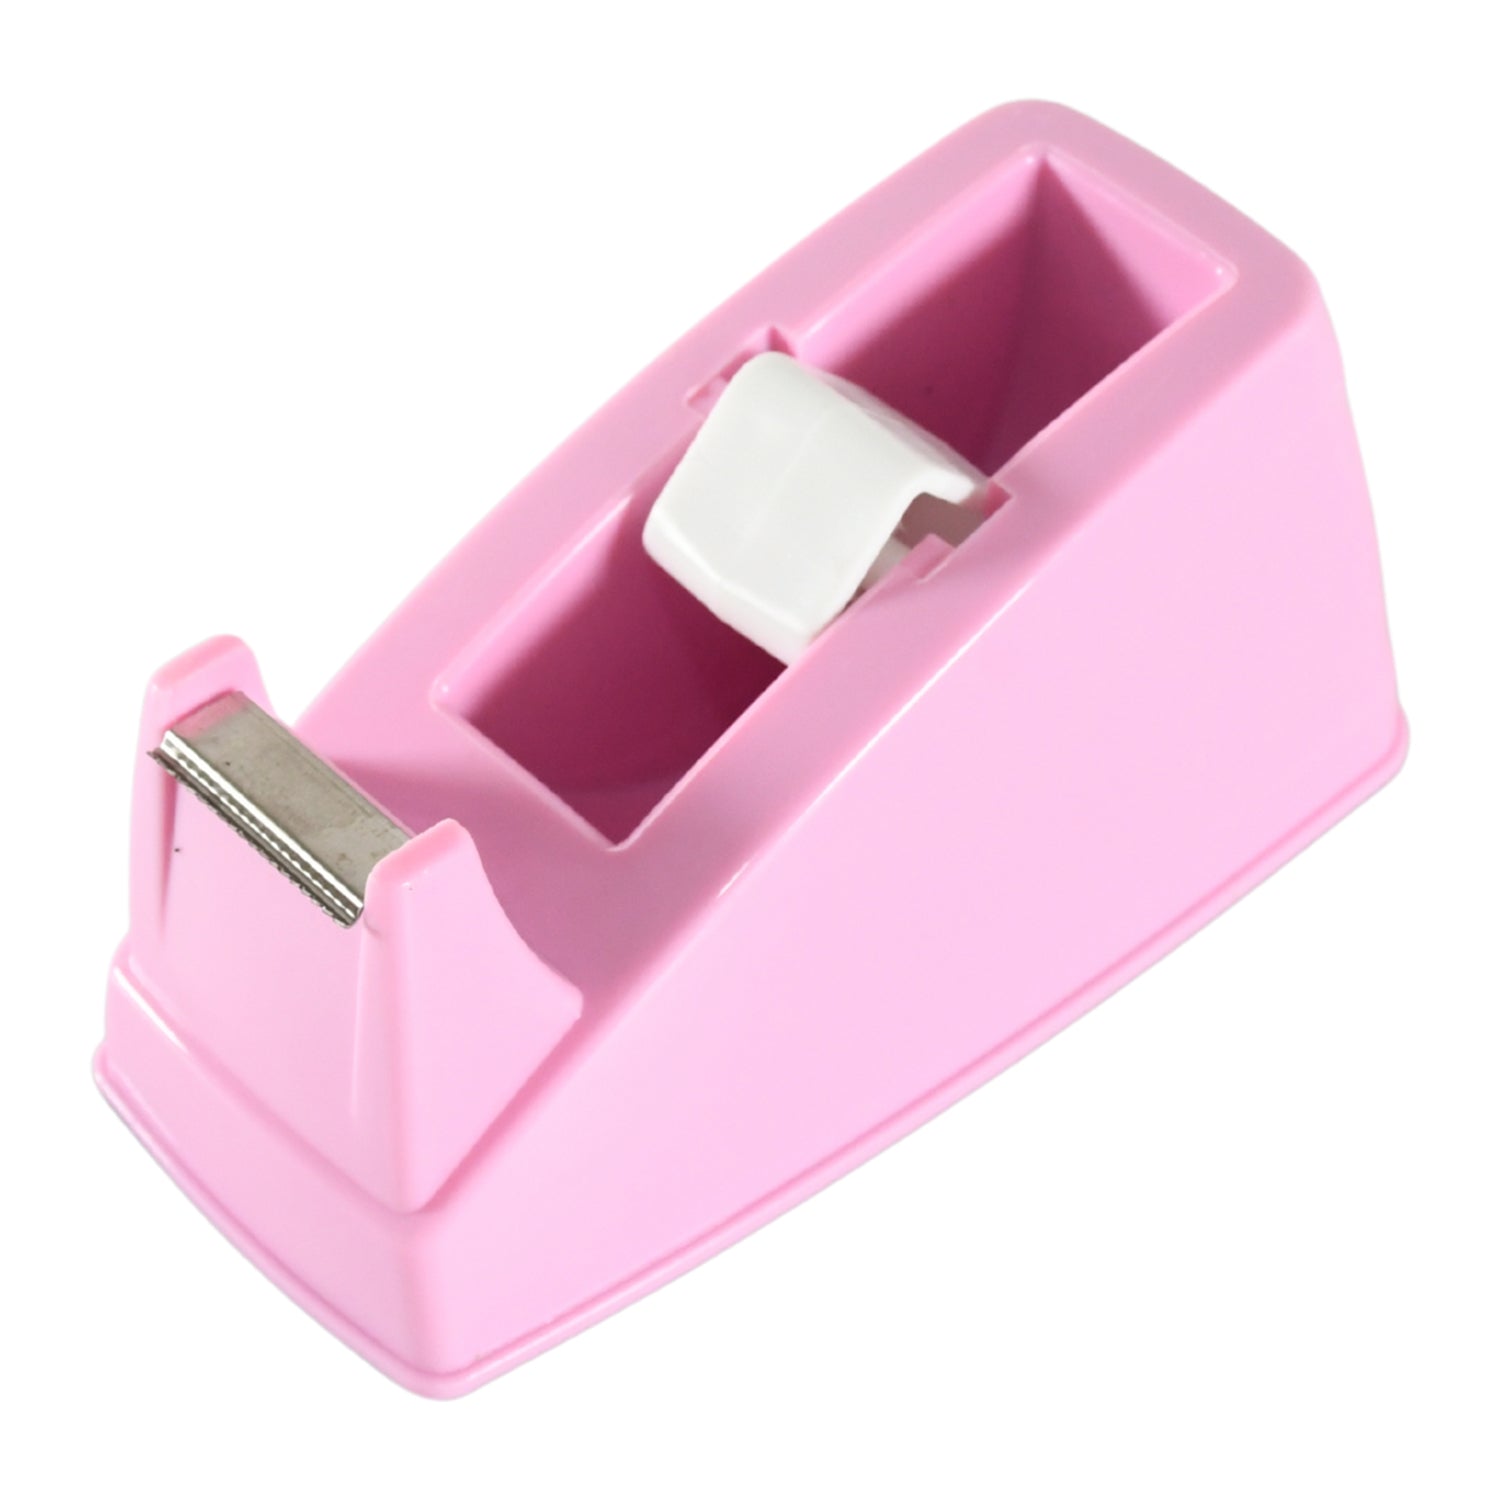 9465 Plastic Tape Dispenser Cutter for Home Office use, Tape Dispenser for Stationary, Tape Cutter Packaging Tape School Supplies (1 pc / 300 Gm)